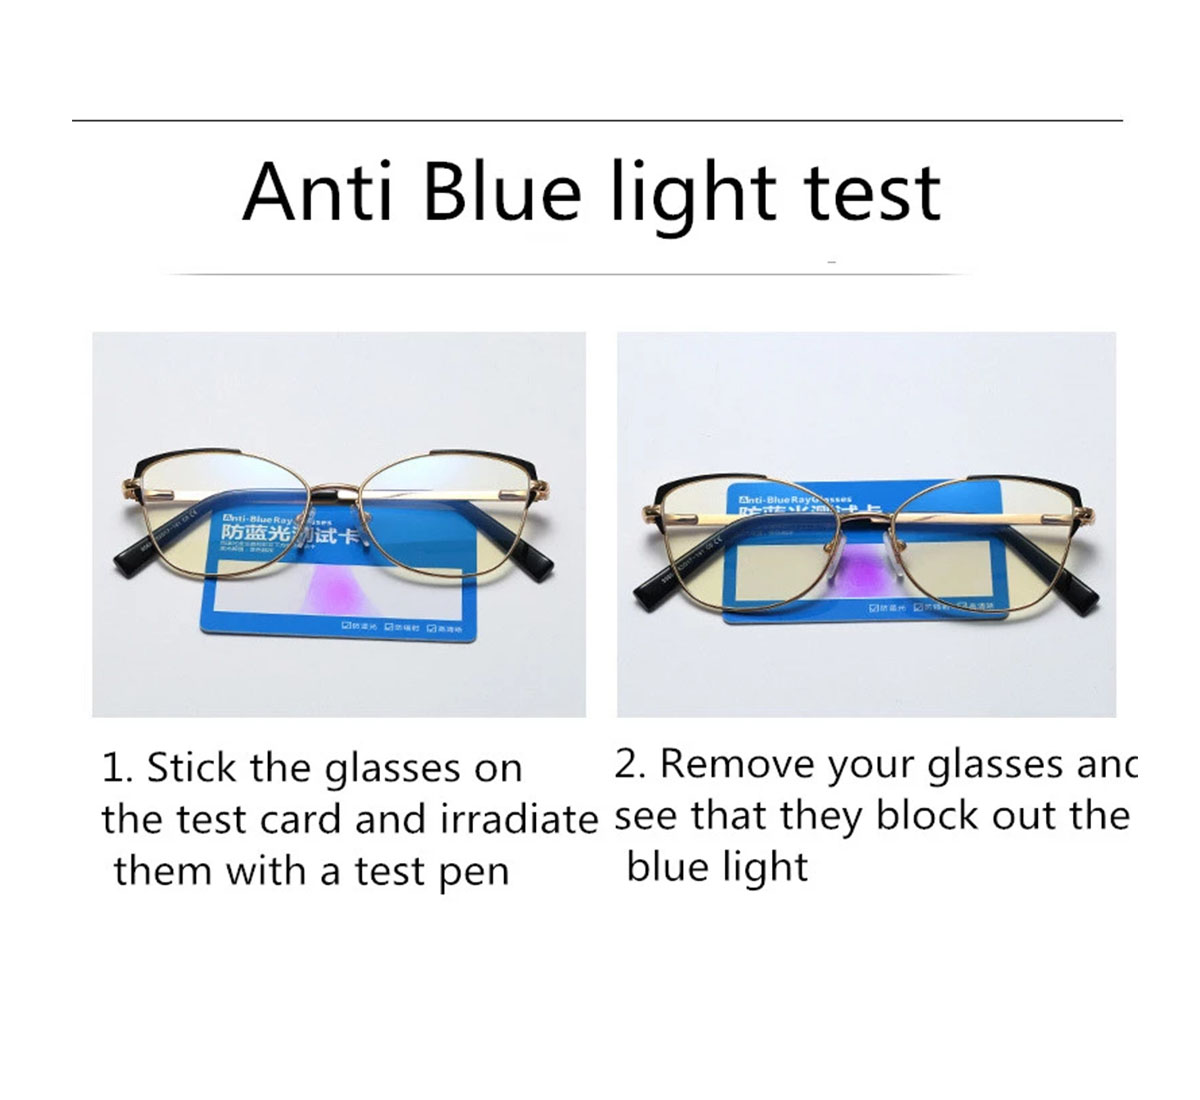 How to tell if my glasses are blue light